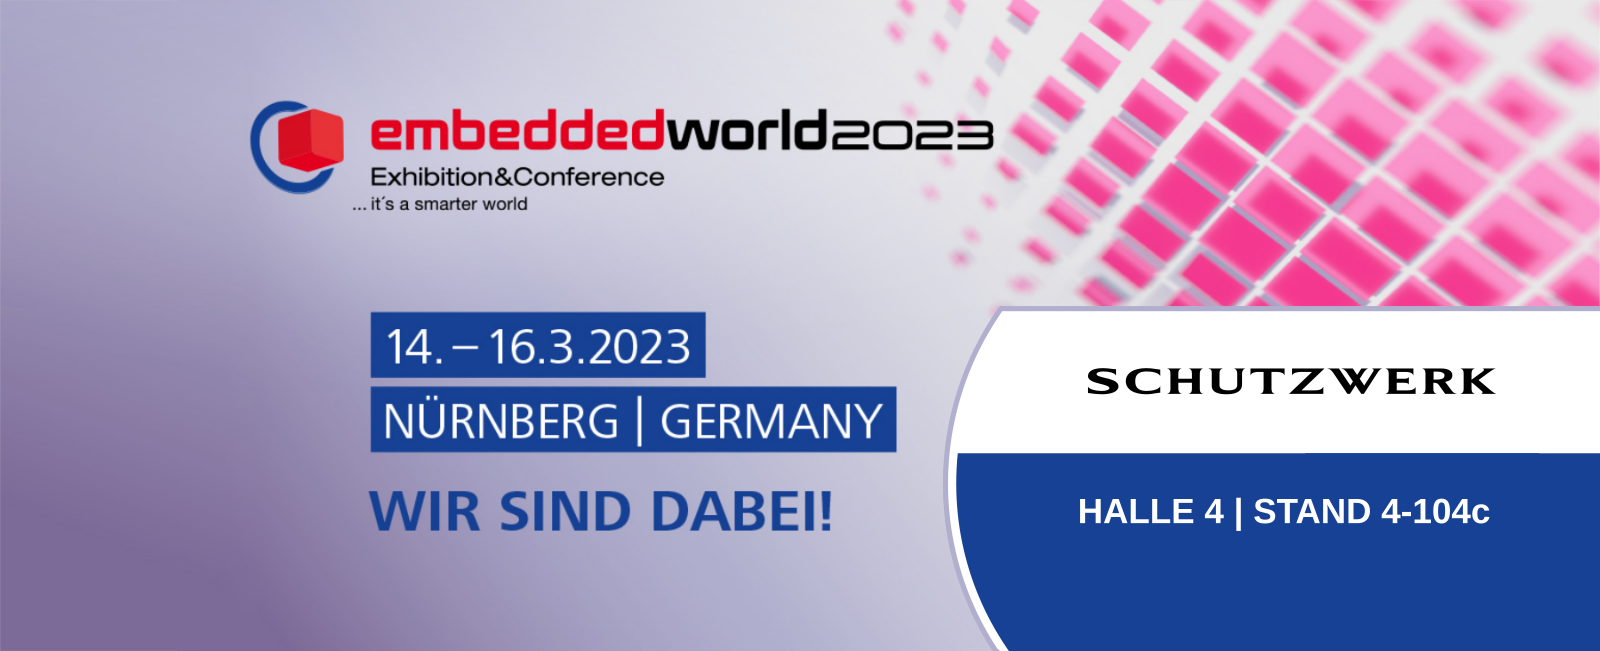 preview-image for embedded world Exhibition&Conference